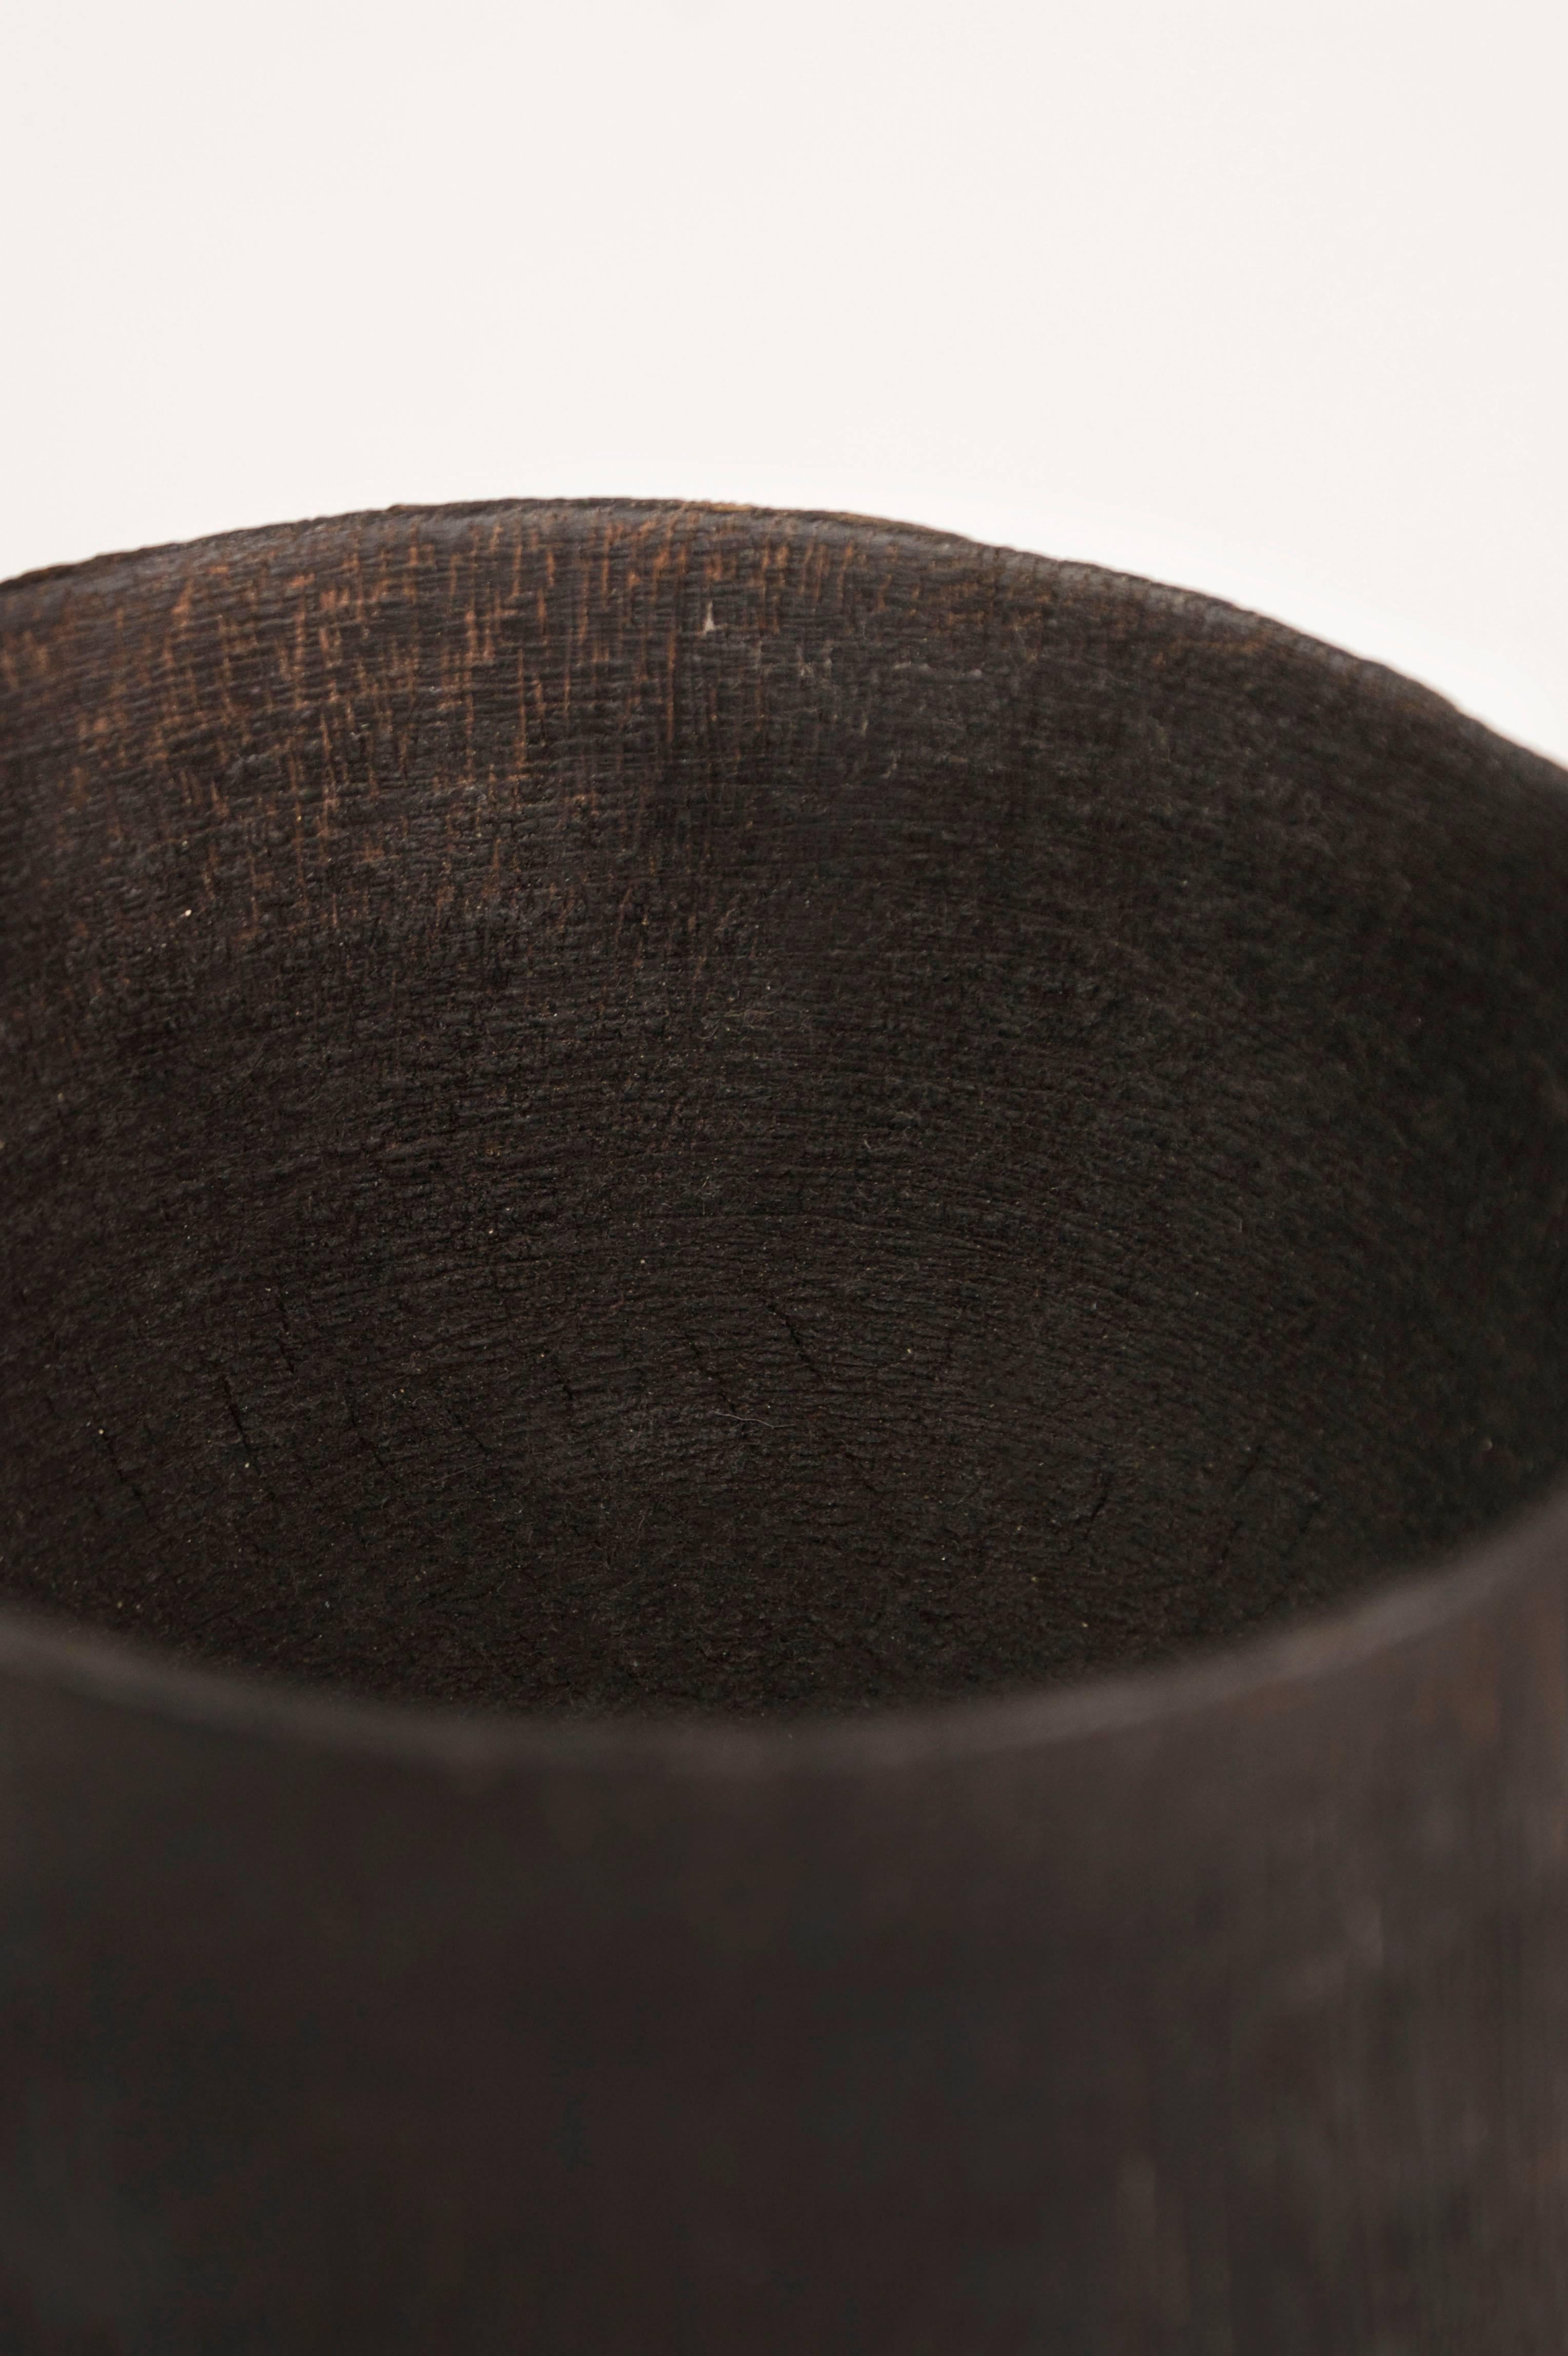 Contemporary Pair of Goblet Bowl, Iroko and Oak, Signed Arno Declercq For Sale